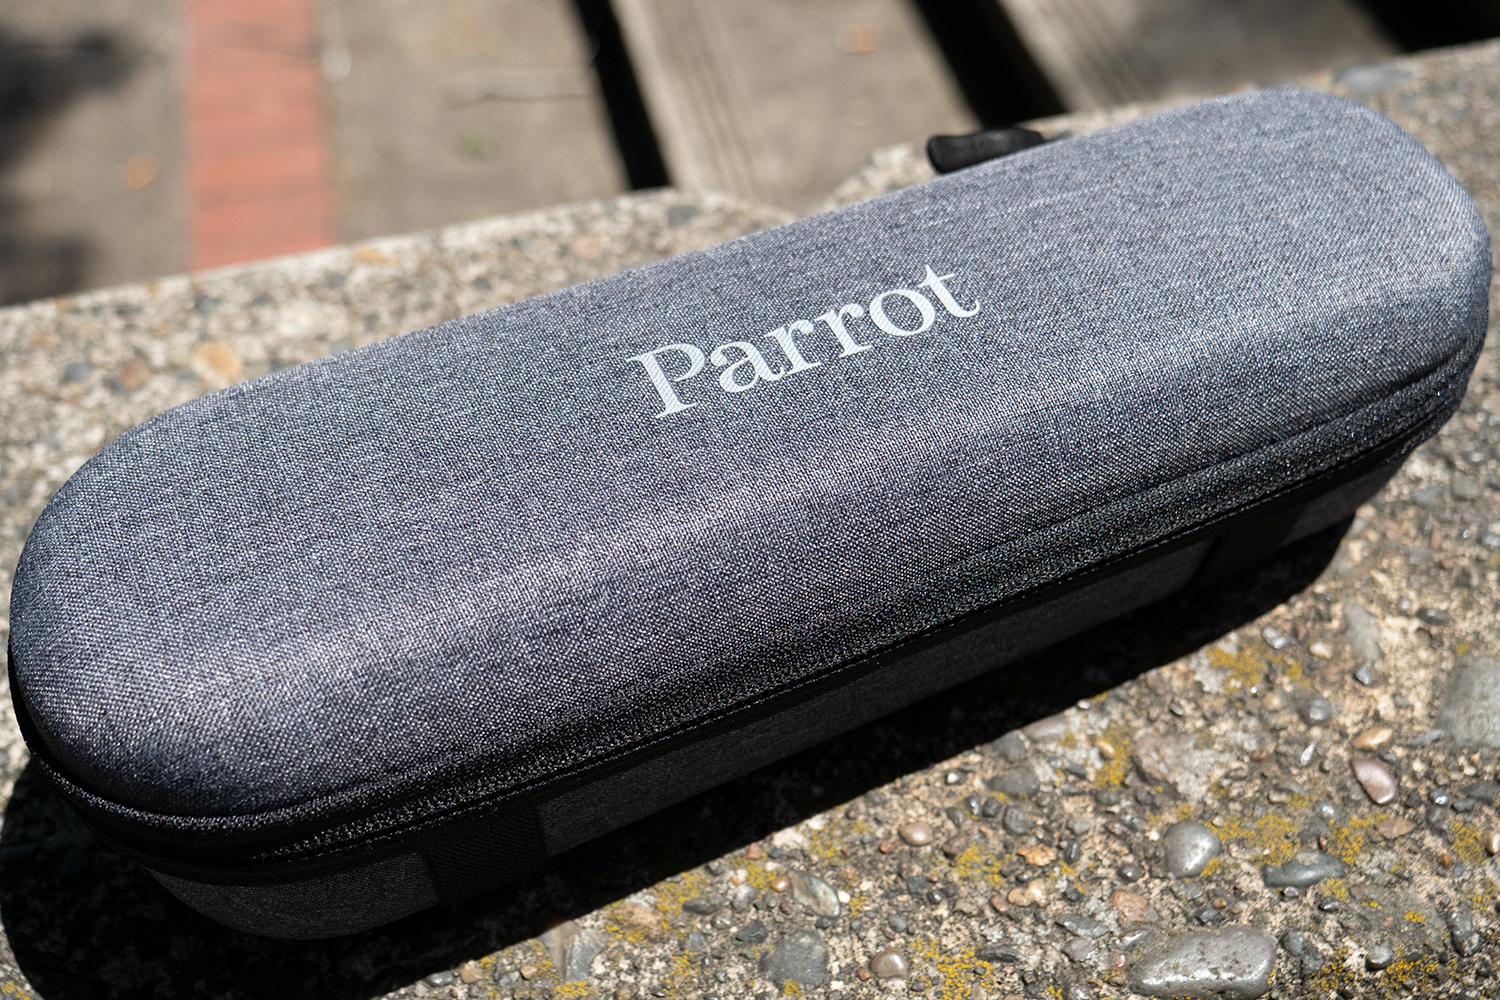 Parrot Anafi review: A compact drone that's blind as a bat